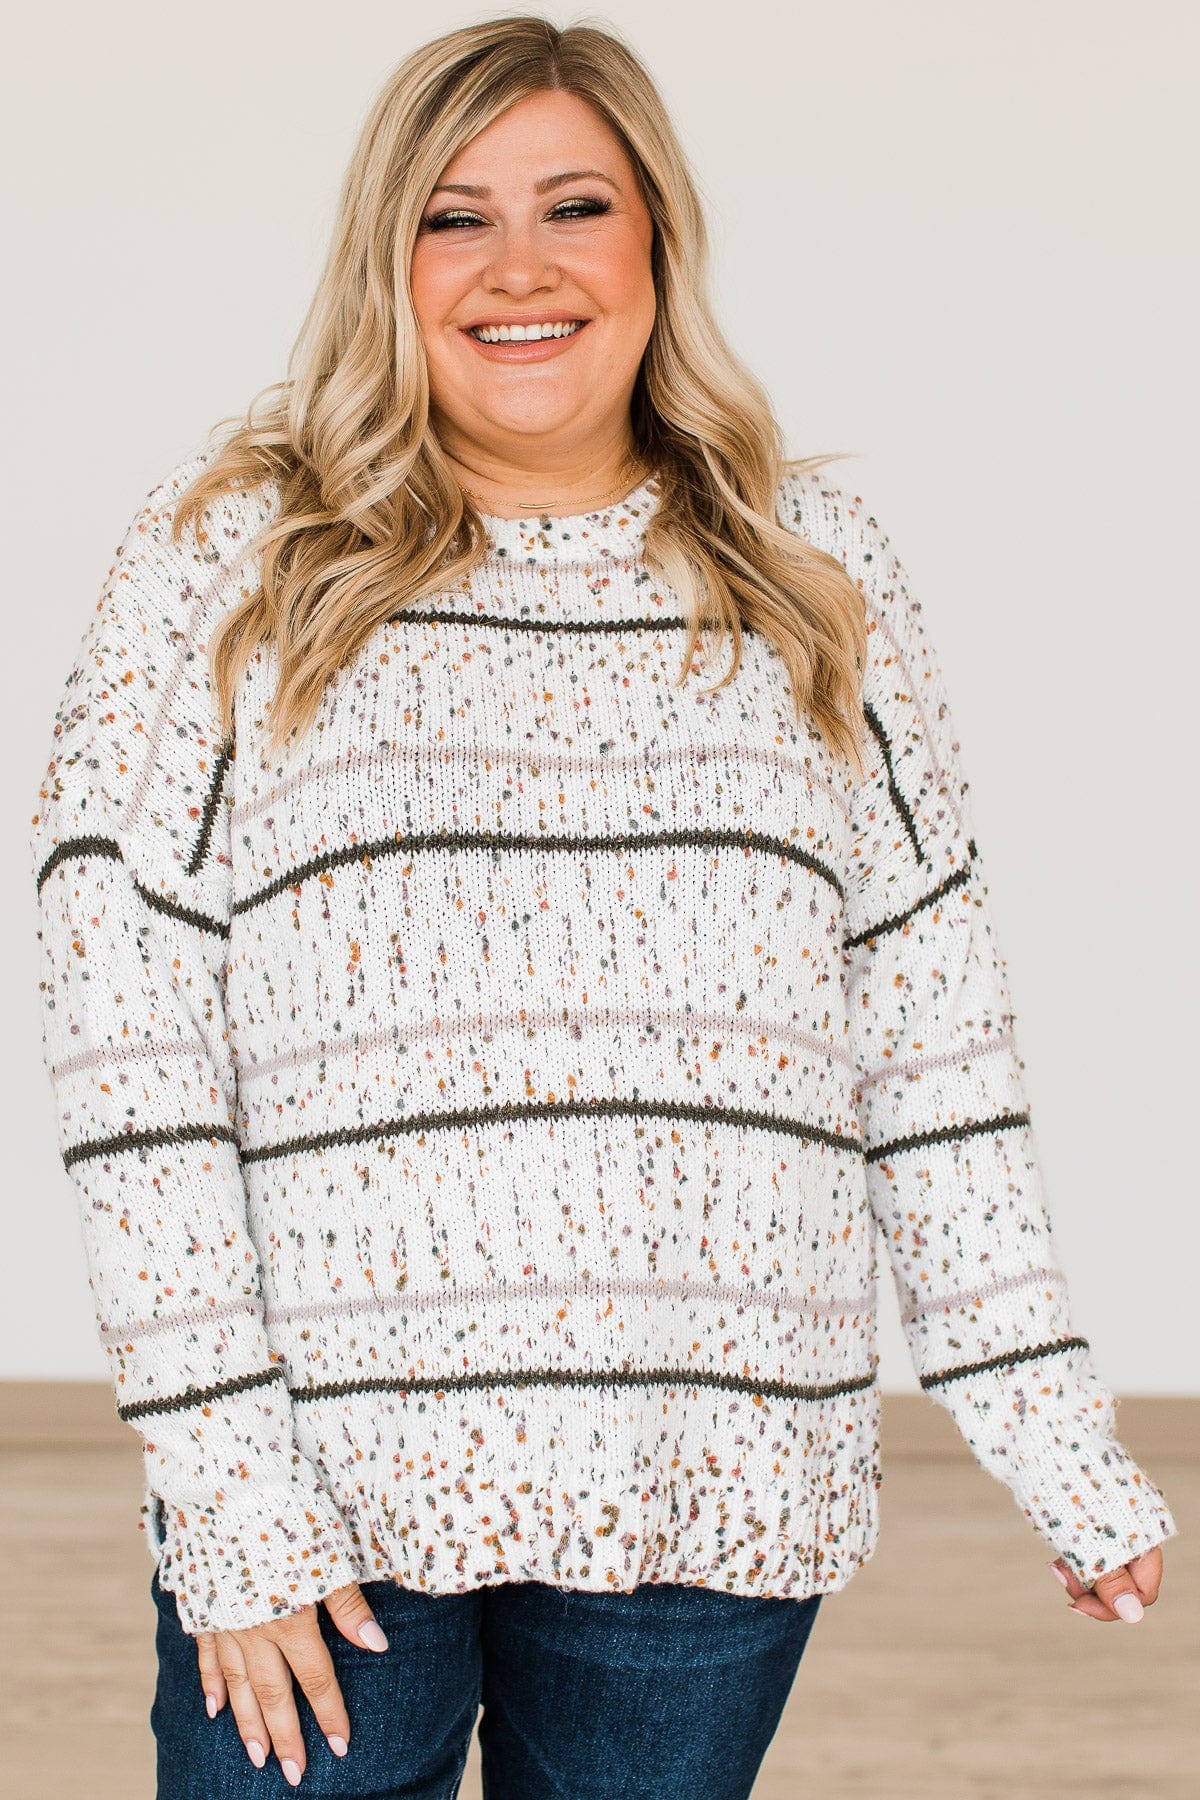 Slouchy Ivory High Low 3/4 Sleeve Sweater-Plus - Sprinkle of Joy Boutique